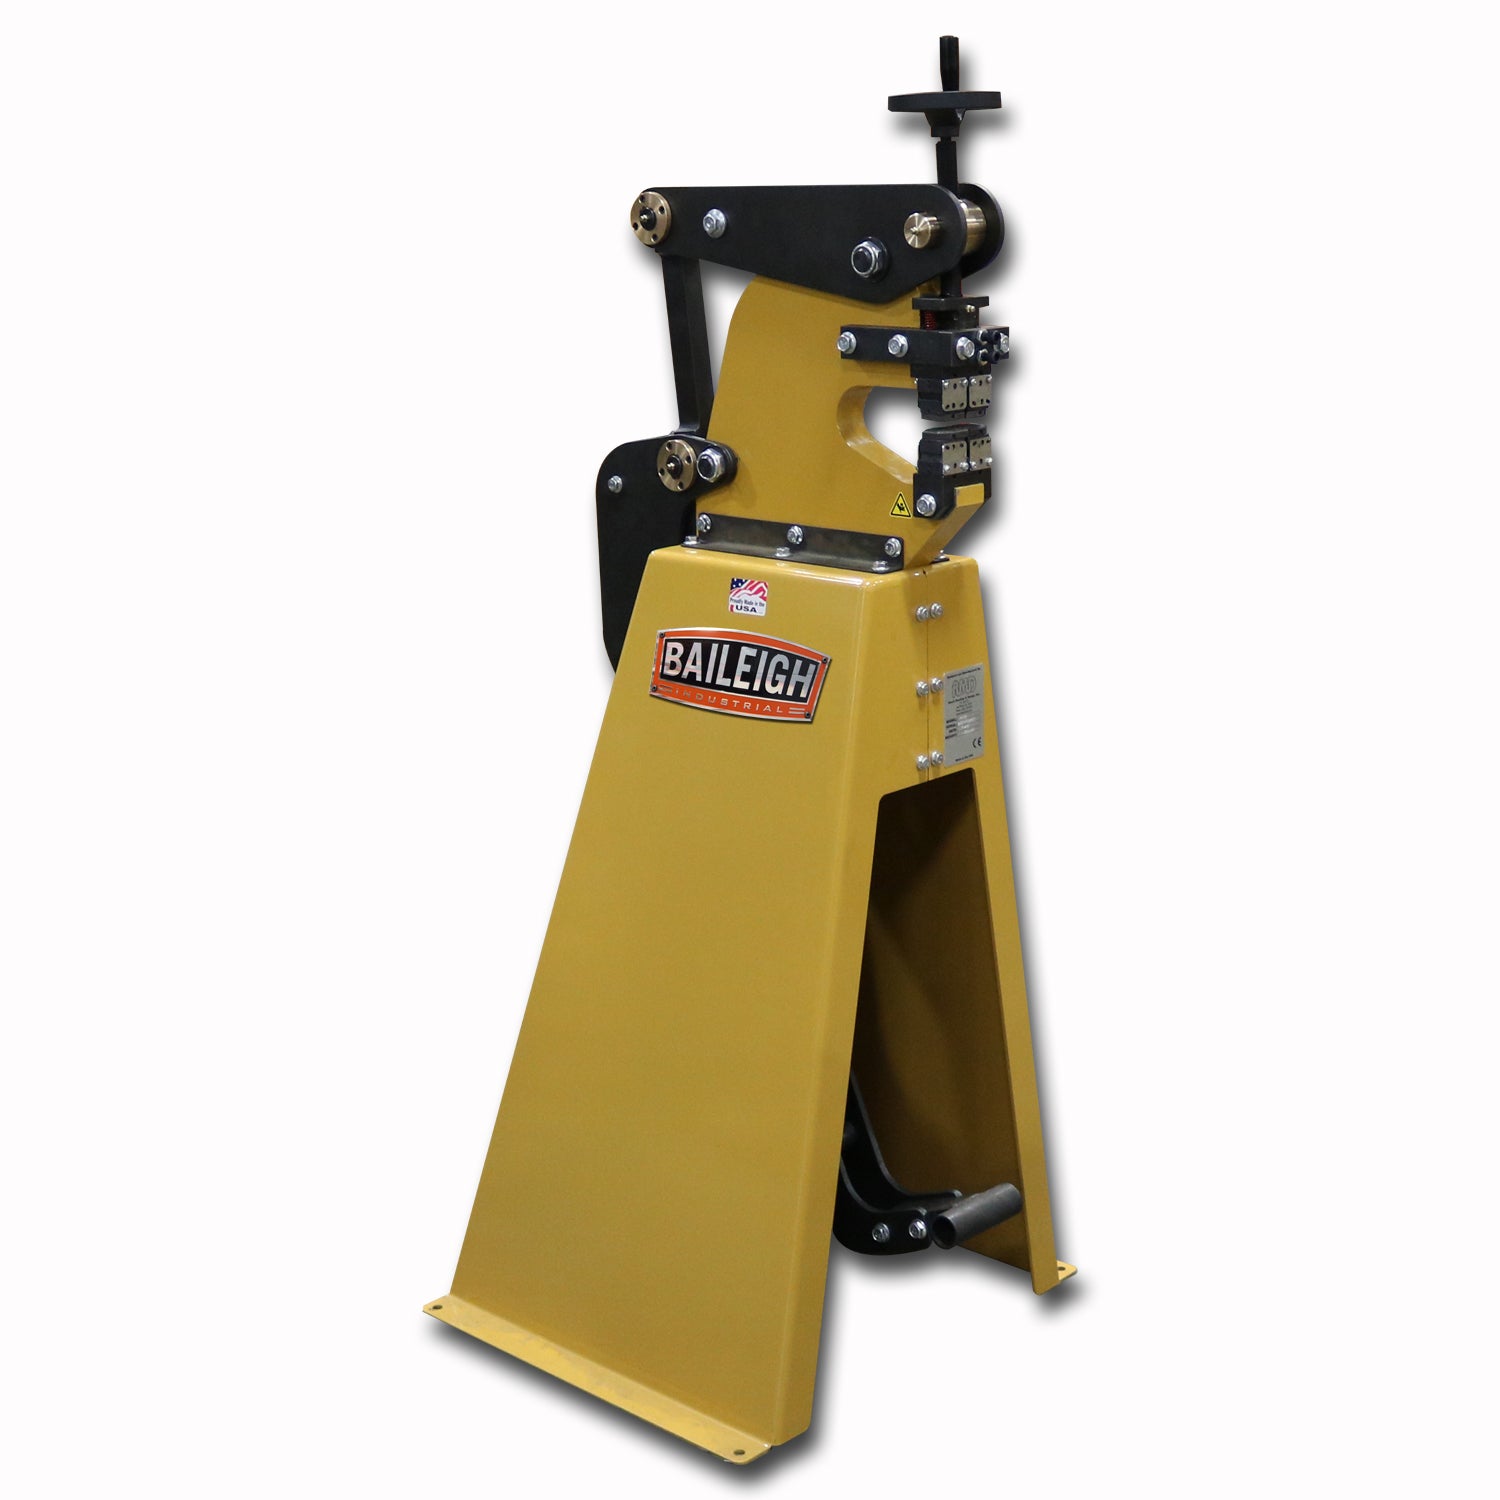 Baileigh MSS-14F Manually Operated Shrinker Stretcher Includes Reversible Jaws to Shrink and Stretch